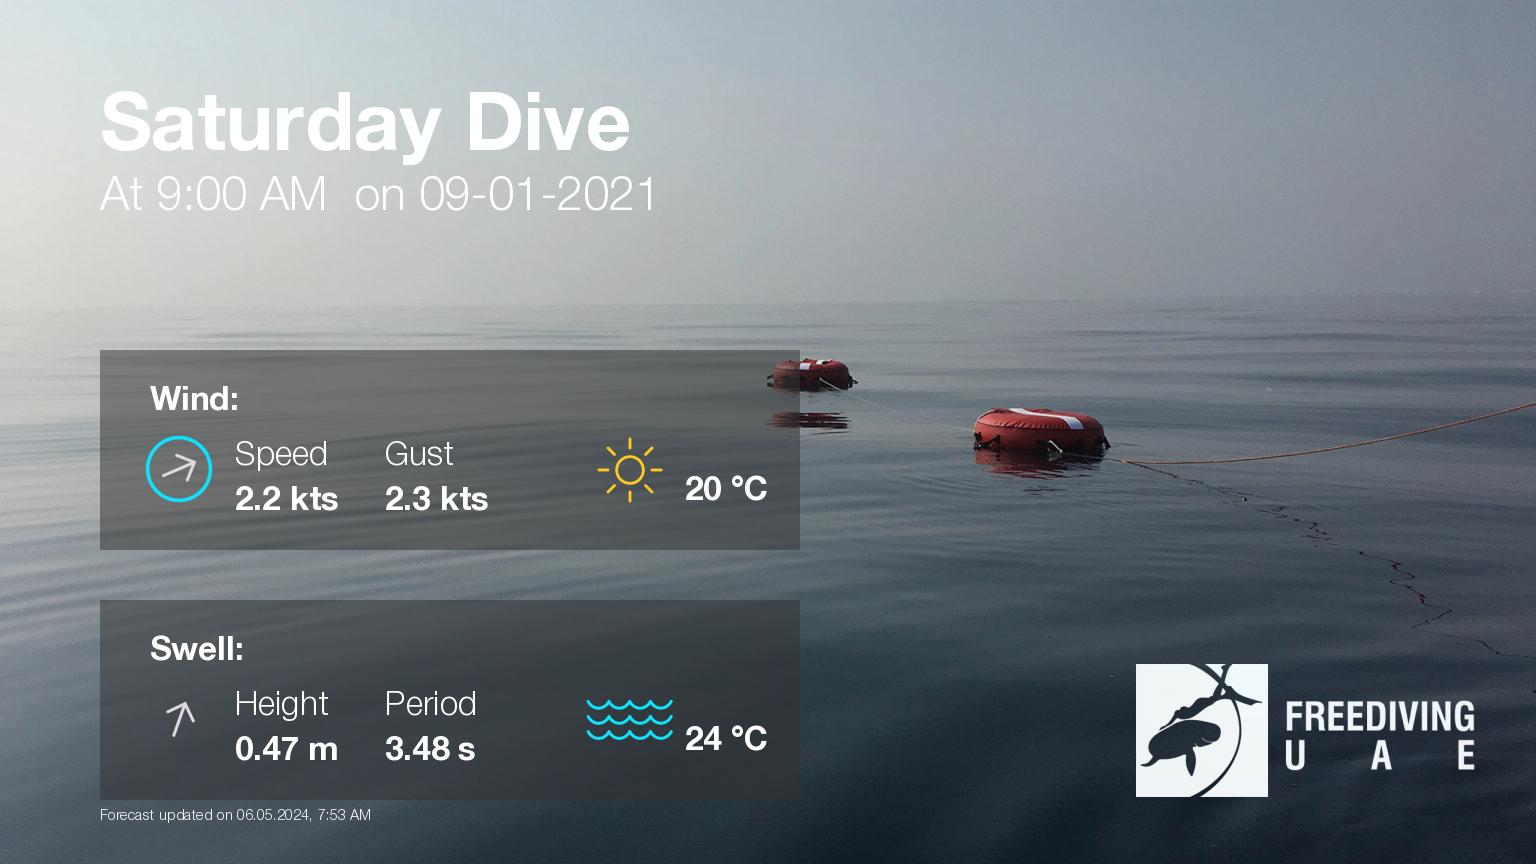 Expected weather during Saturday Dive on Sat, Jan 9, at 9:00 AM